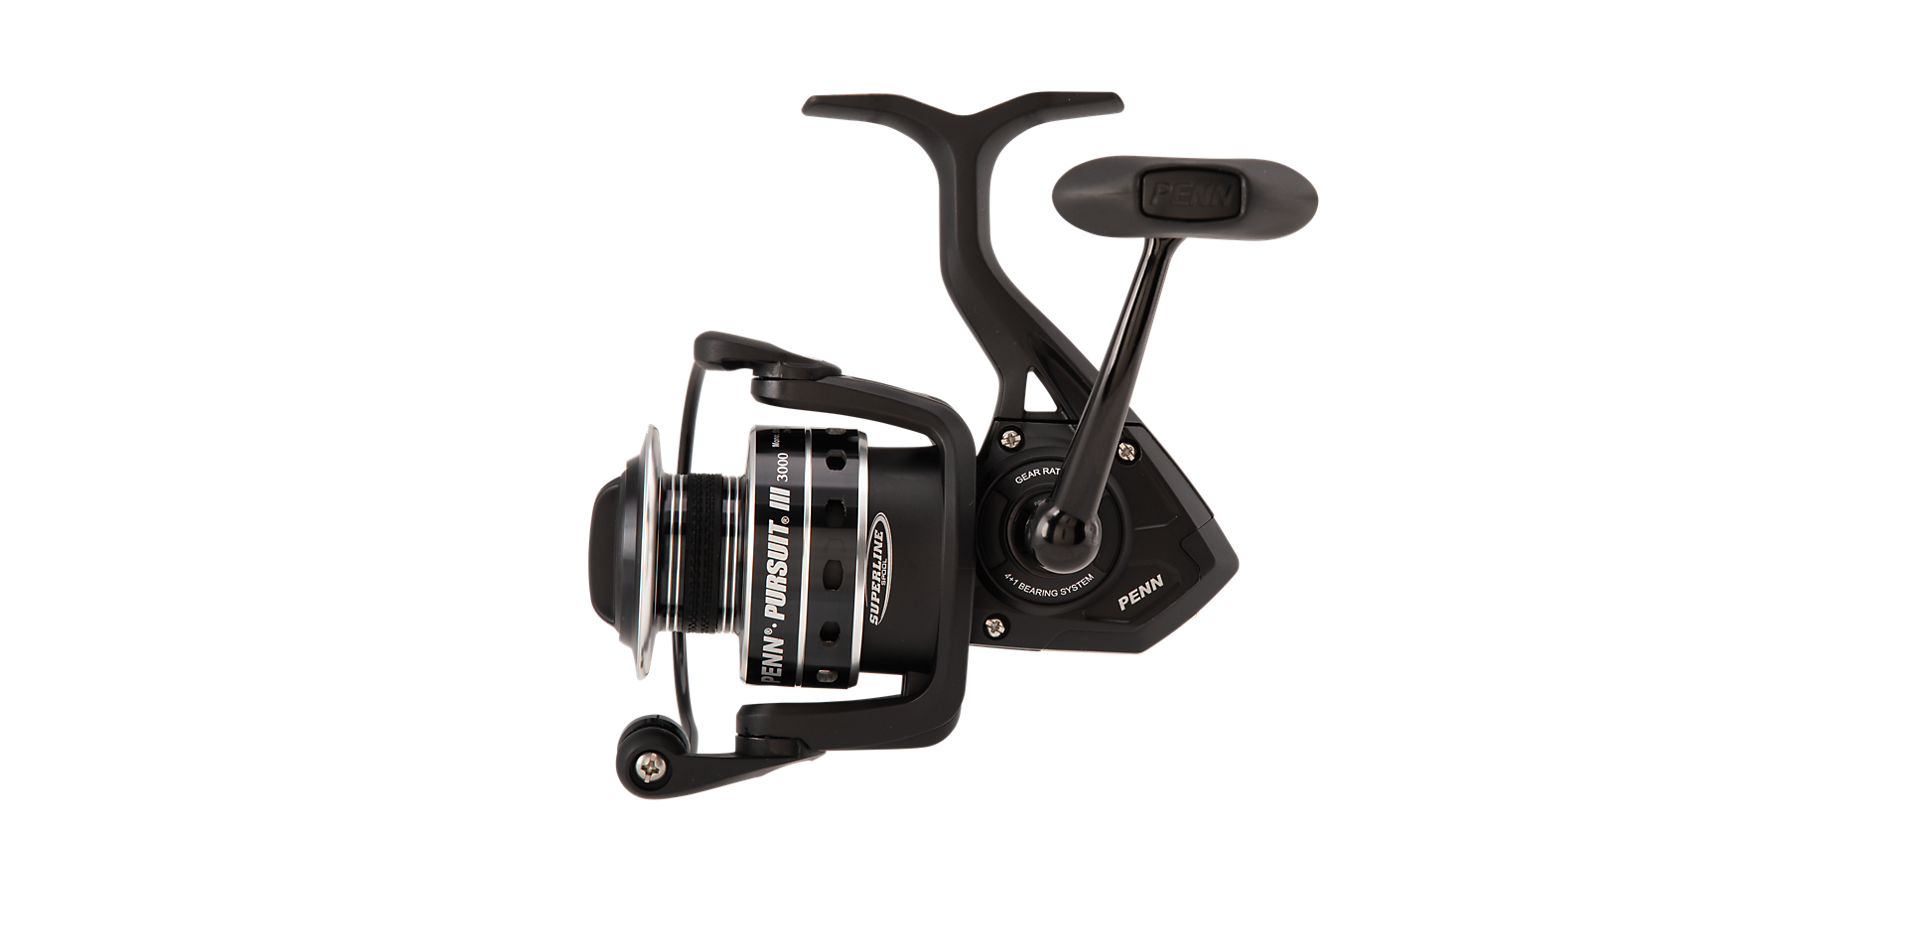 Penn Pursuit IV 10 Spin Combo with 8000 Reel